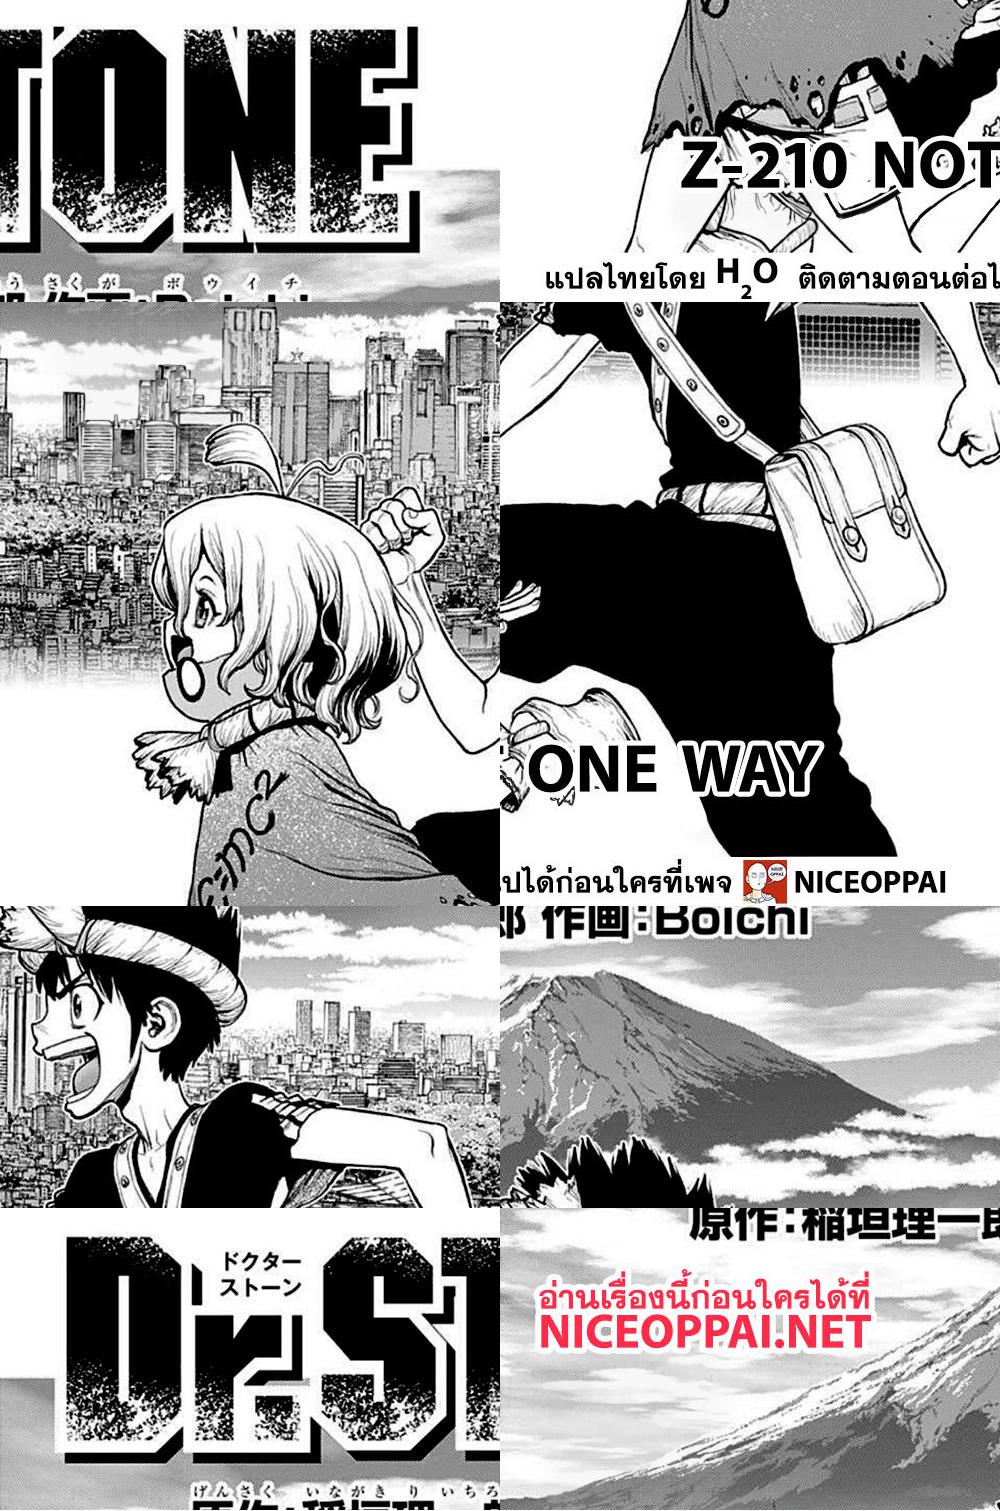 Dr.Stone - NOT ONE WAY - 2